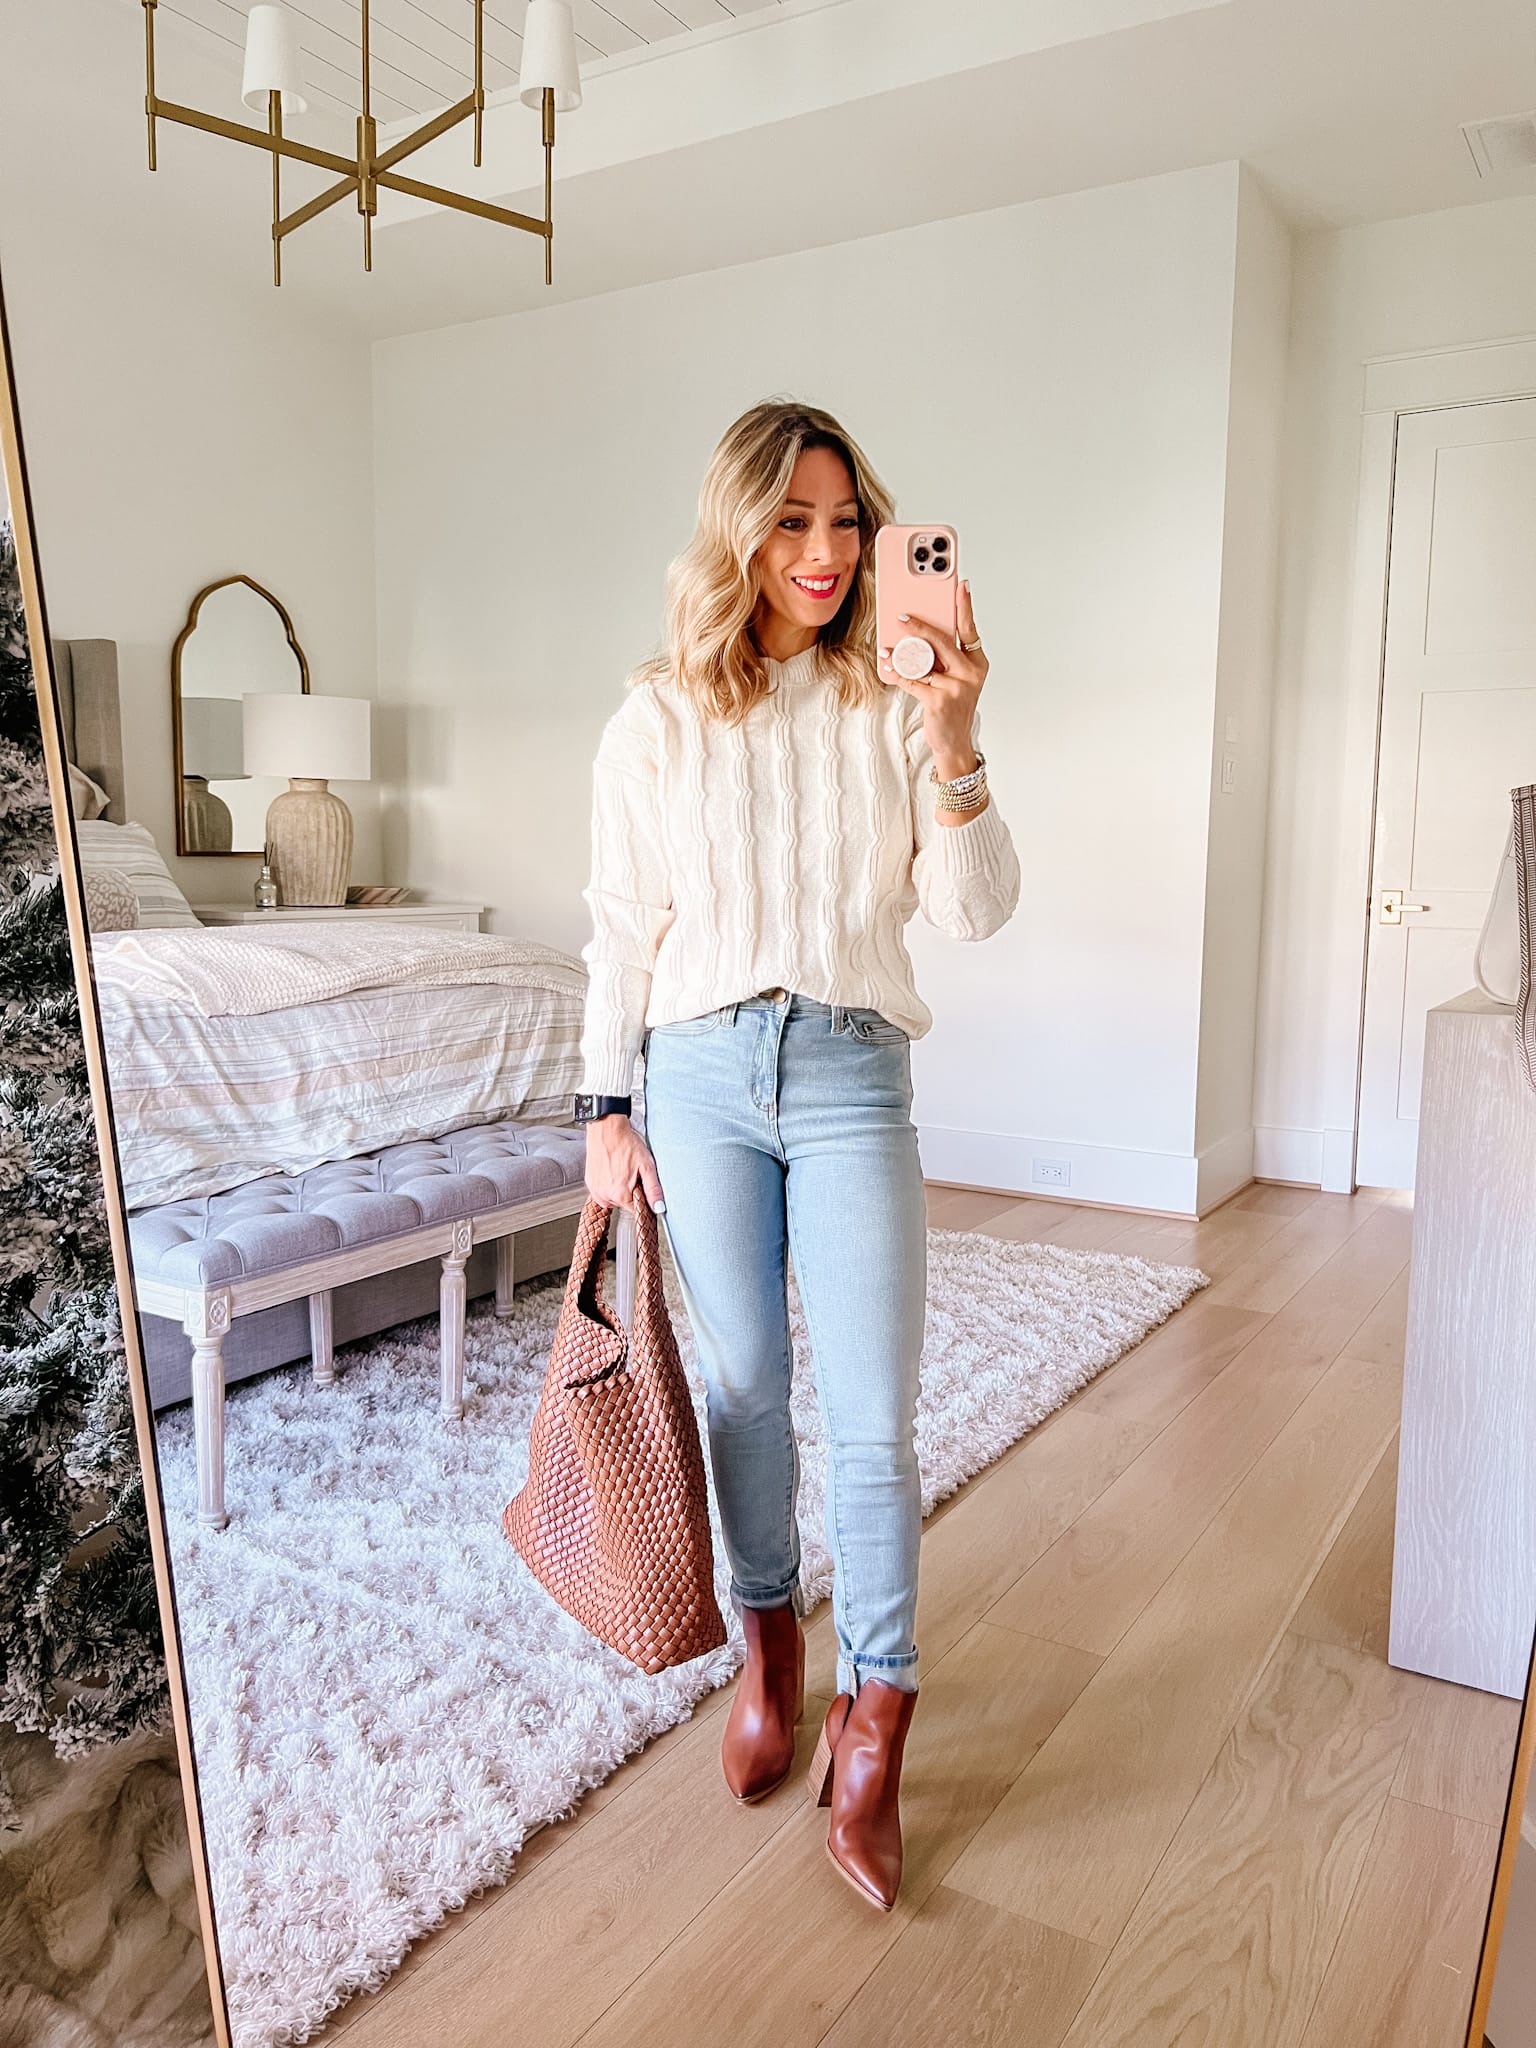 Cable knit Sweater, jeans, Booties, Bag 